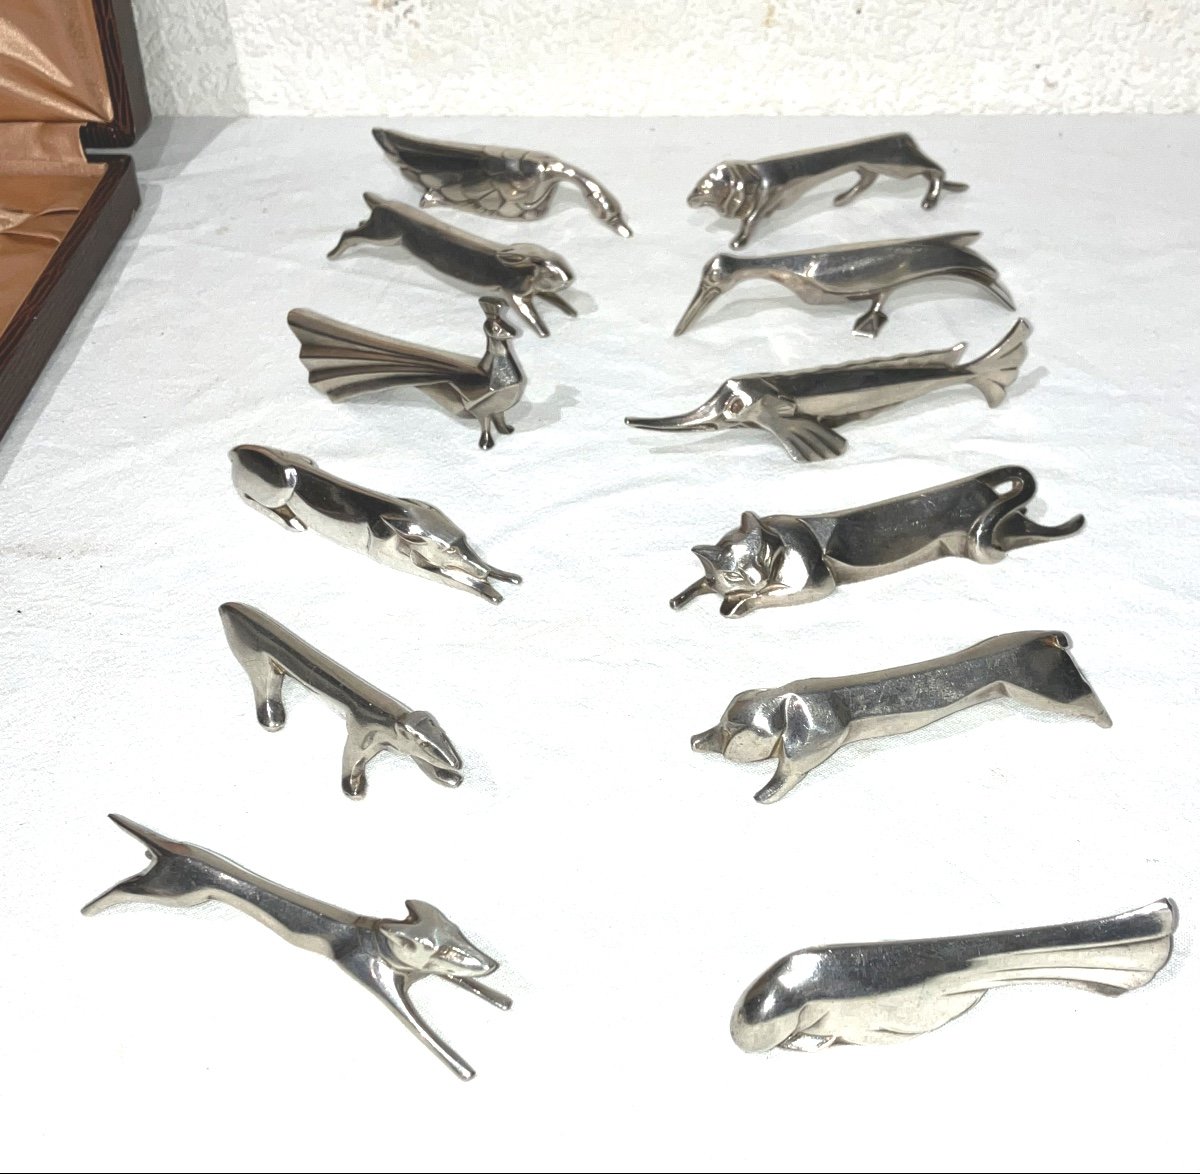 Marcel Sandoz And Gallia Series Of 12 Knife Holders In Silver Metal Christofle -photo-3